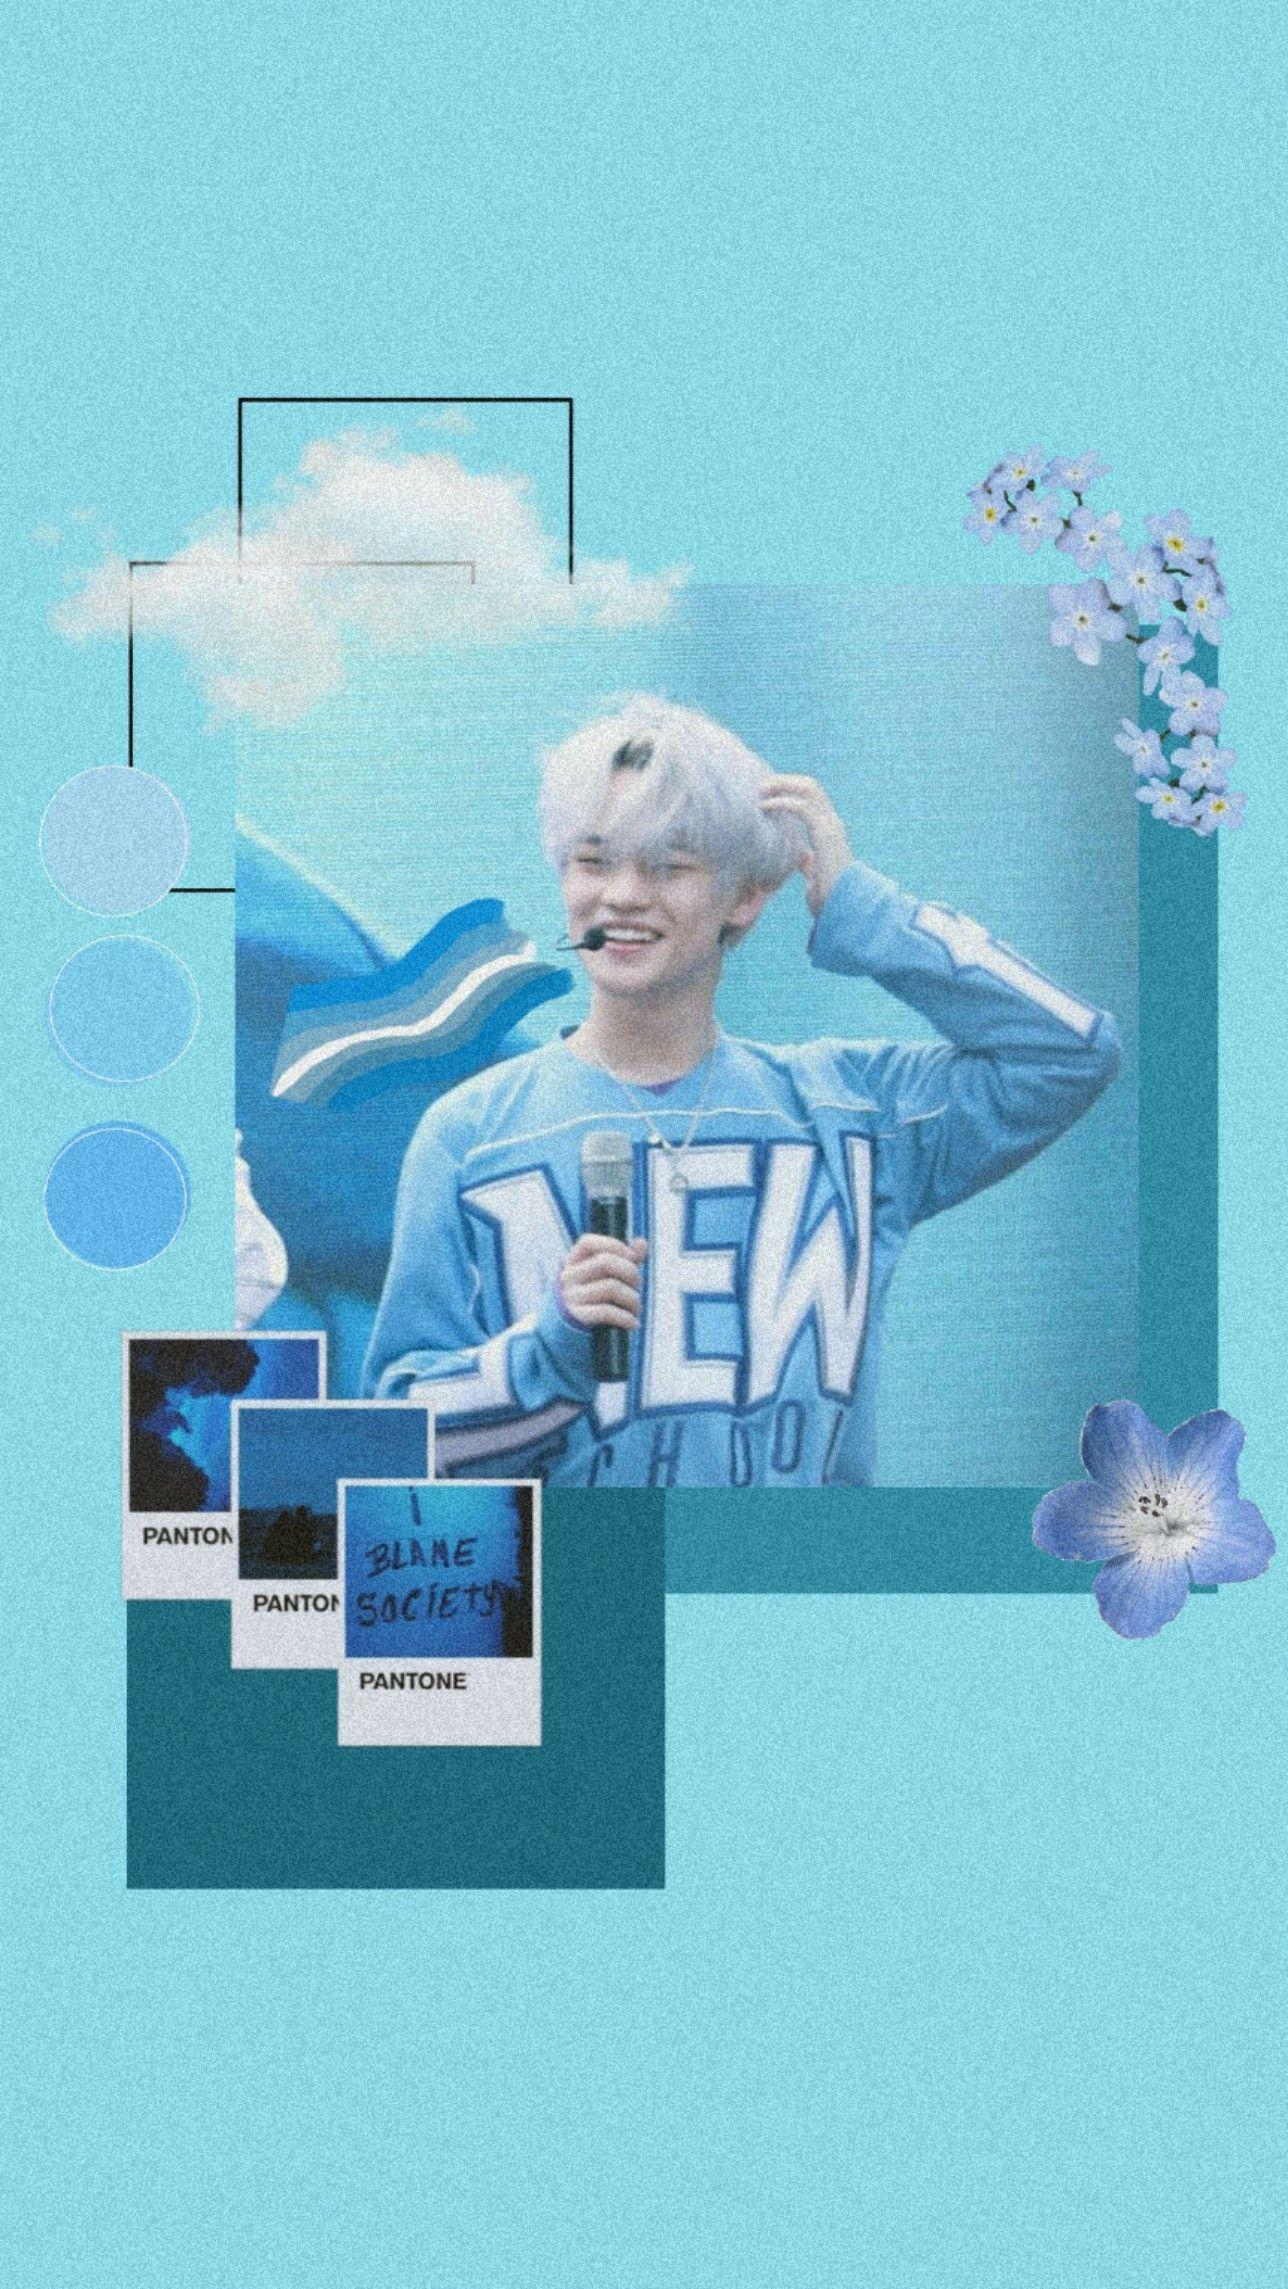 NCT Dream Aesthetic Wallpapers - Top Free NCT Dream Aesthetic ...